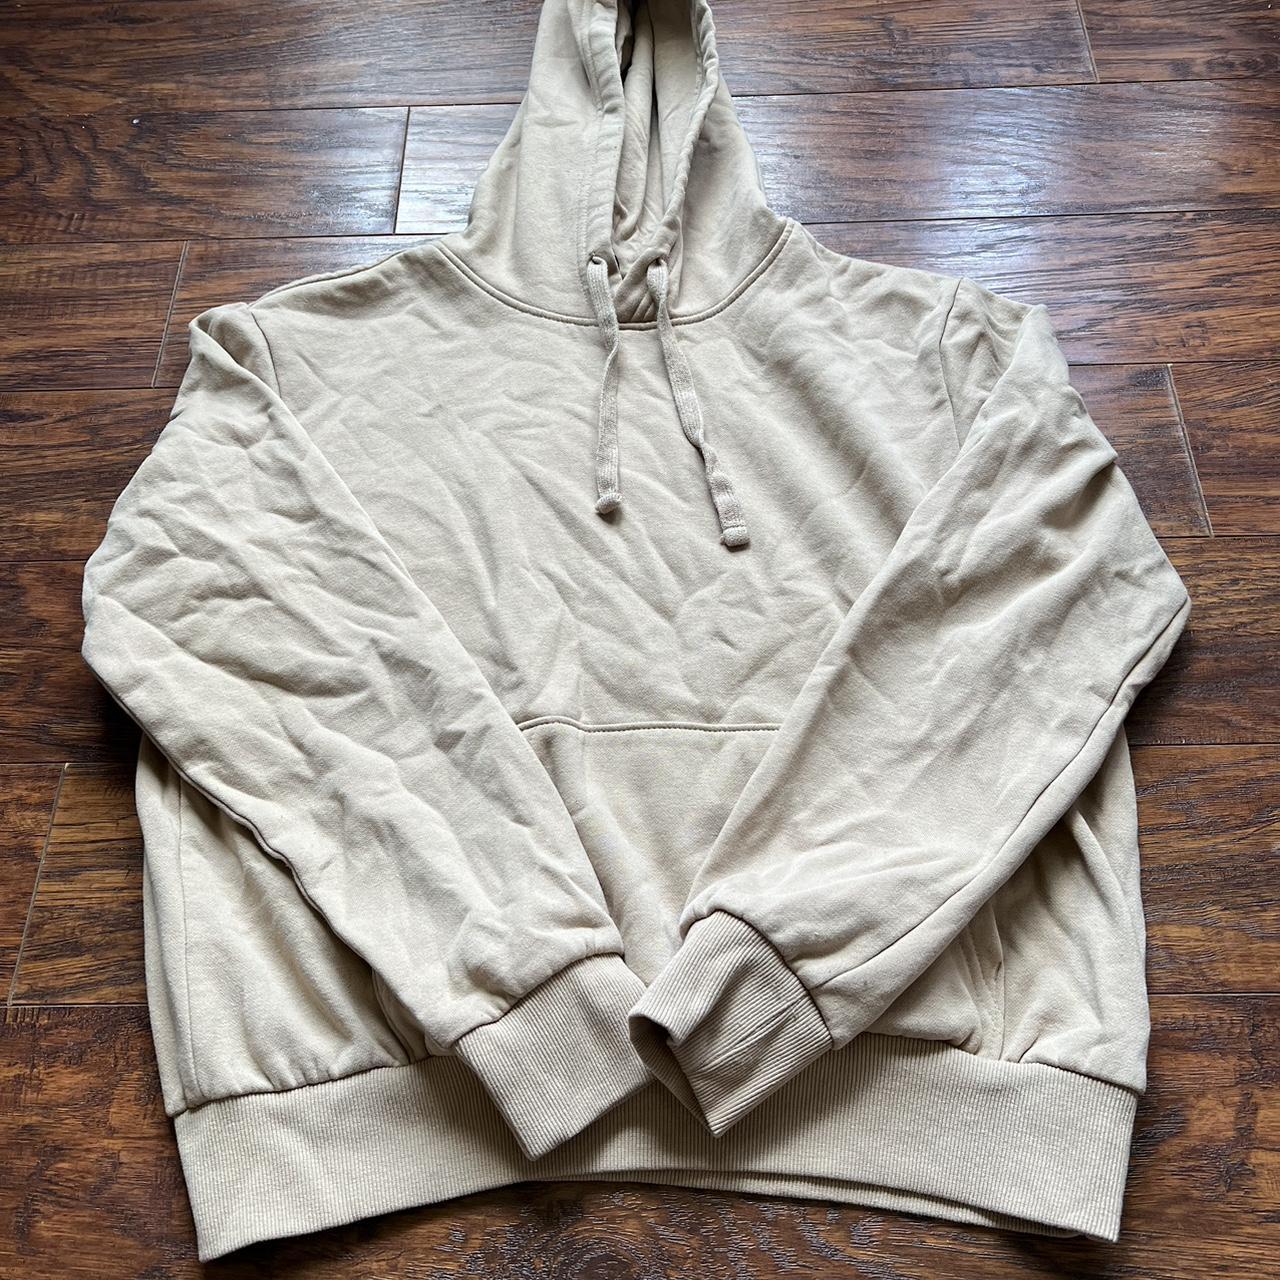 h&m hoodie brownish tanish color a good basic and... - Depop